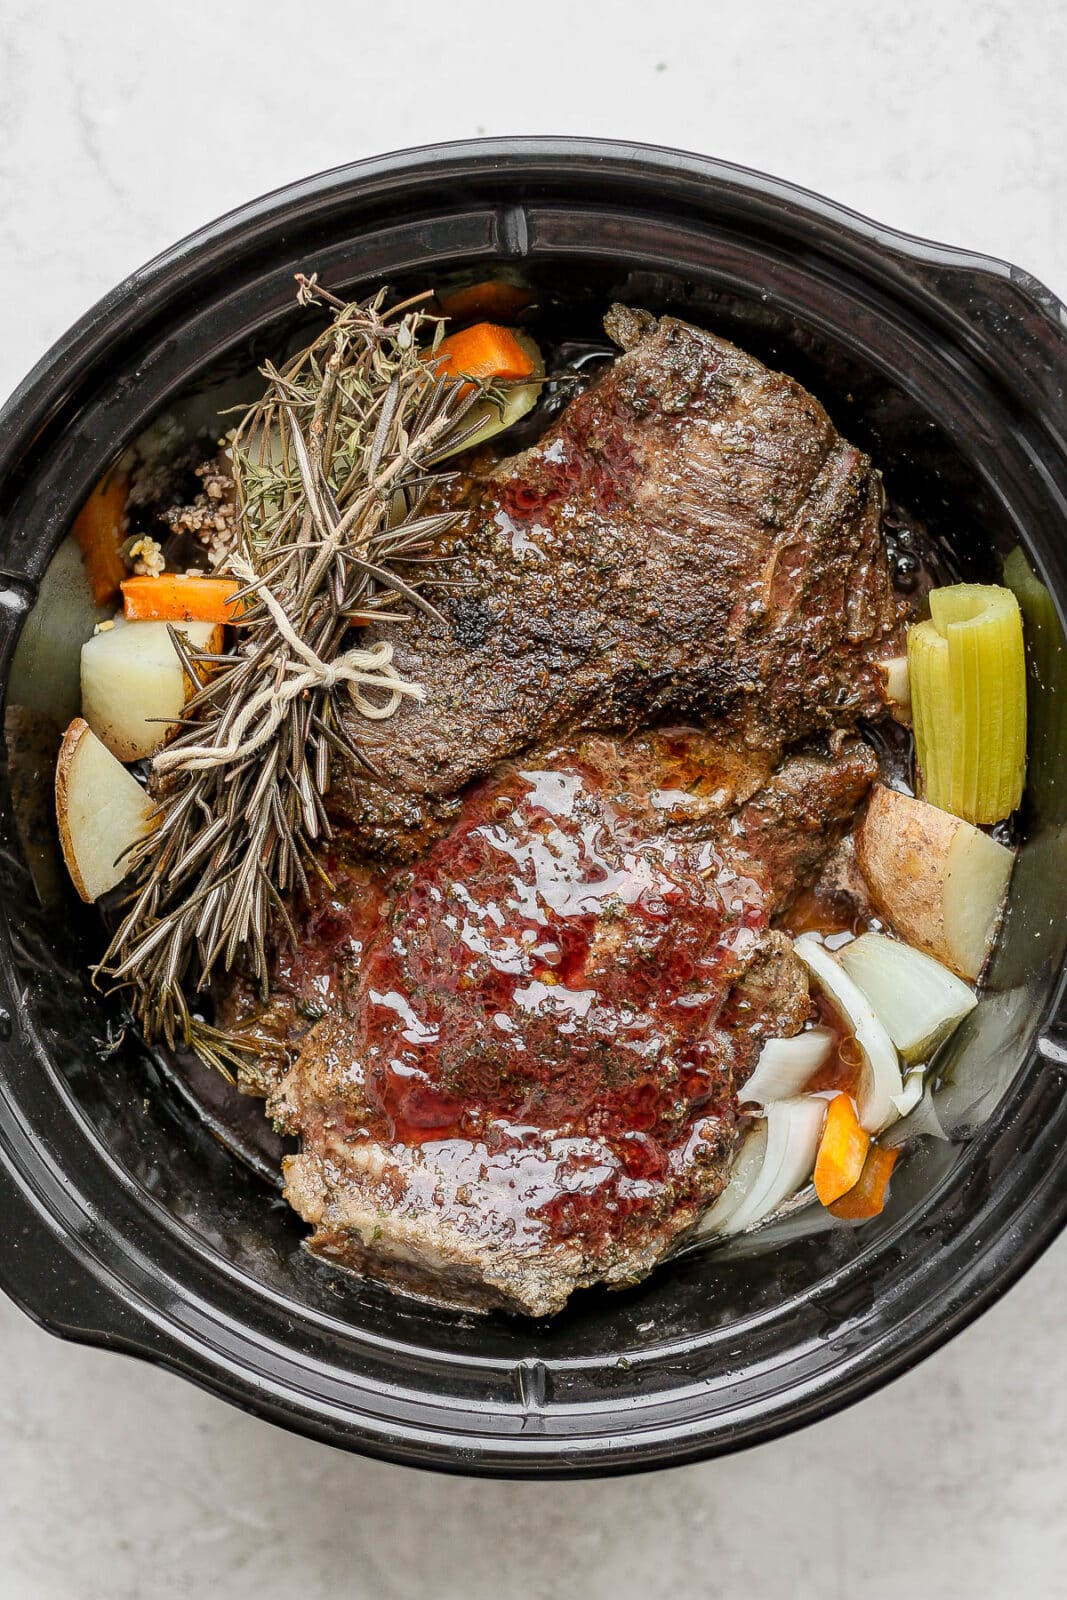 Slow cooker with beef pot roast after cooking.